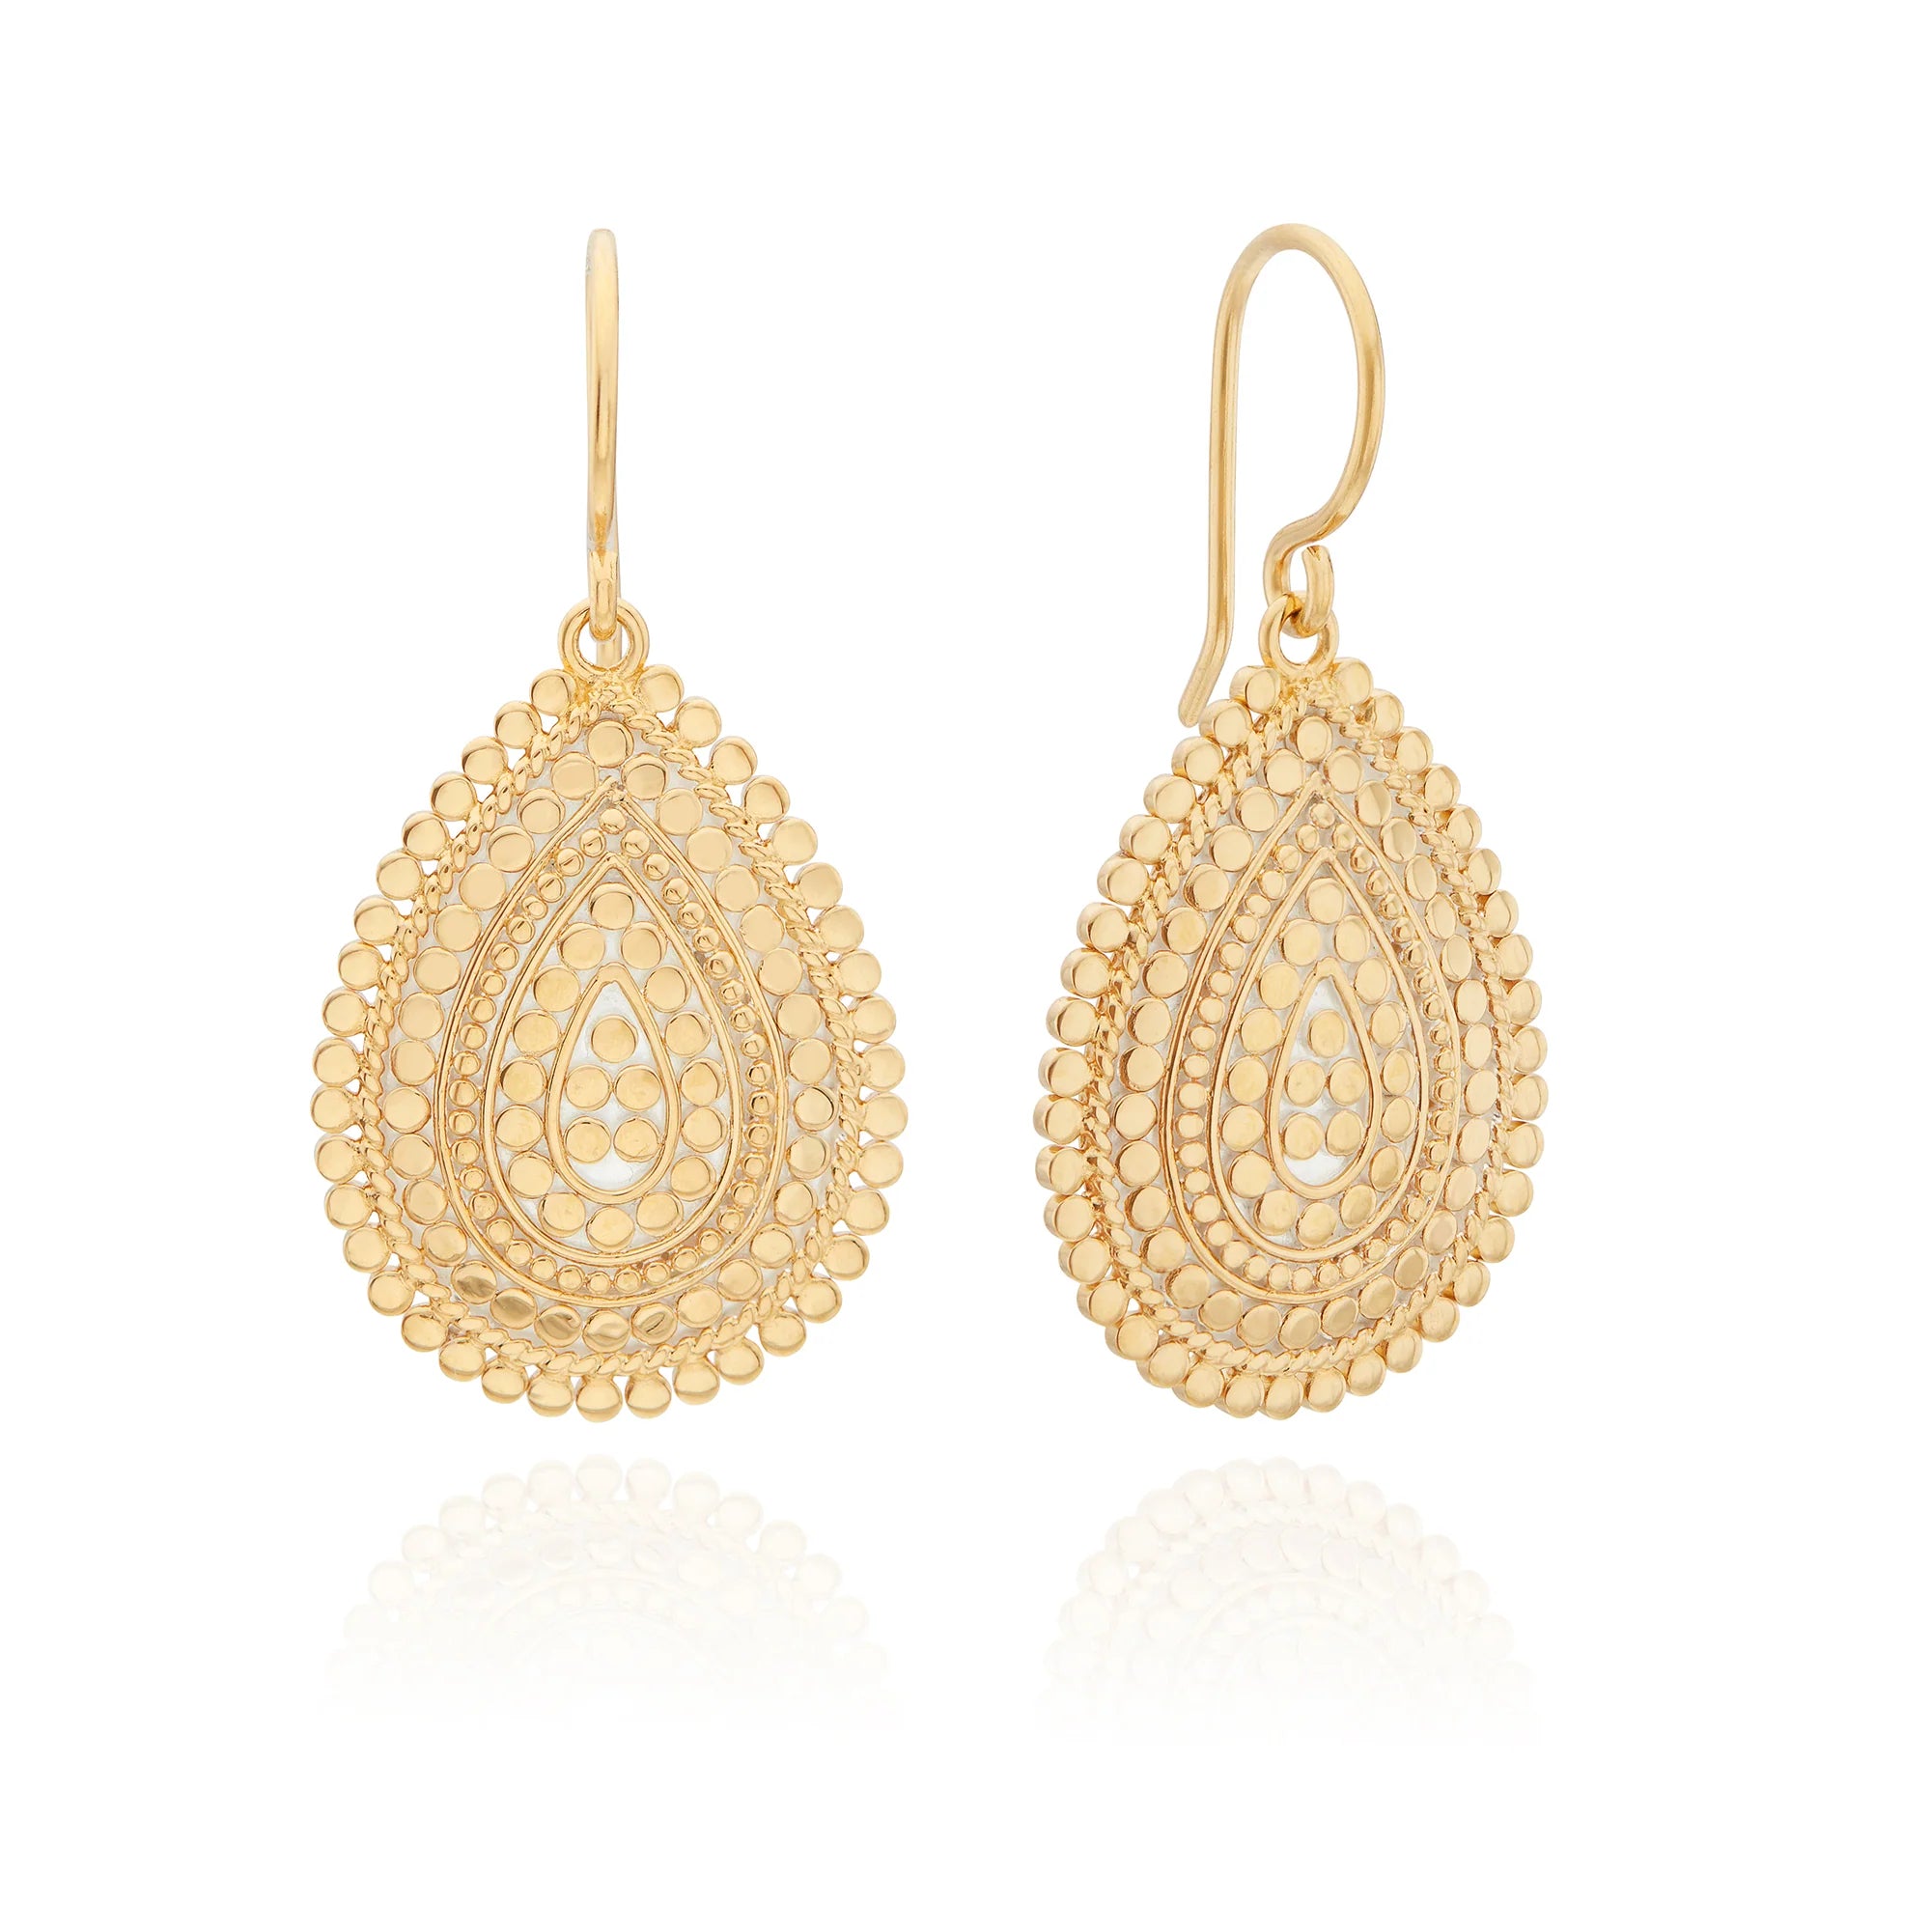 Medium teardrop gold drop earrings with gold dotted details